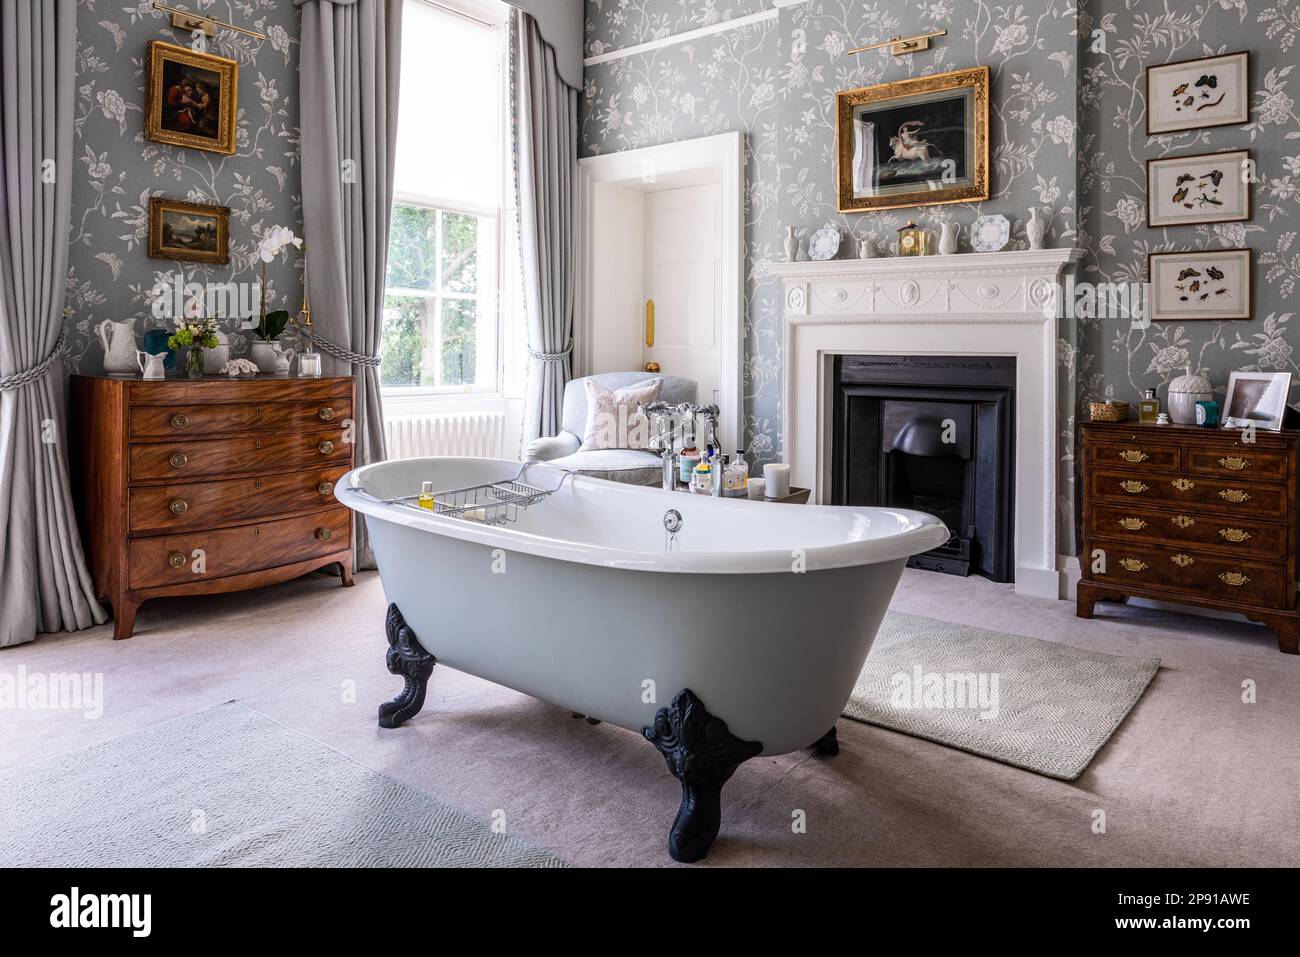 18th century chests with Colefax and Fowler wallpaper and cast iron bath in Grade II listed Suffolk country house, UK Stock Photo